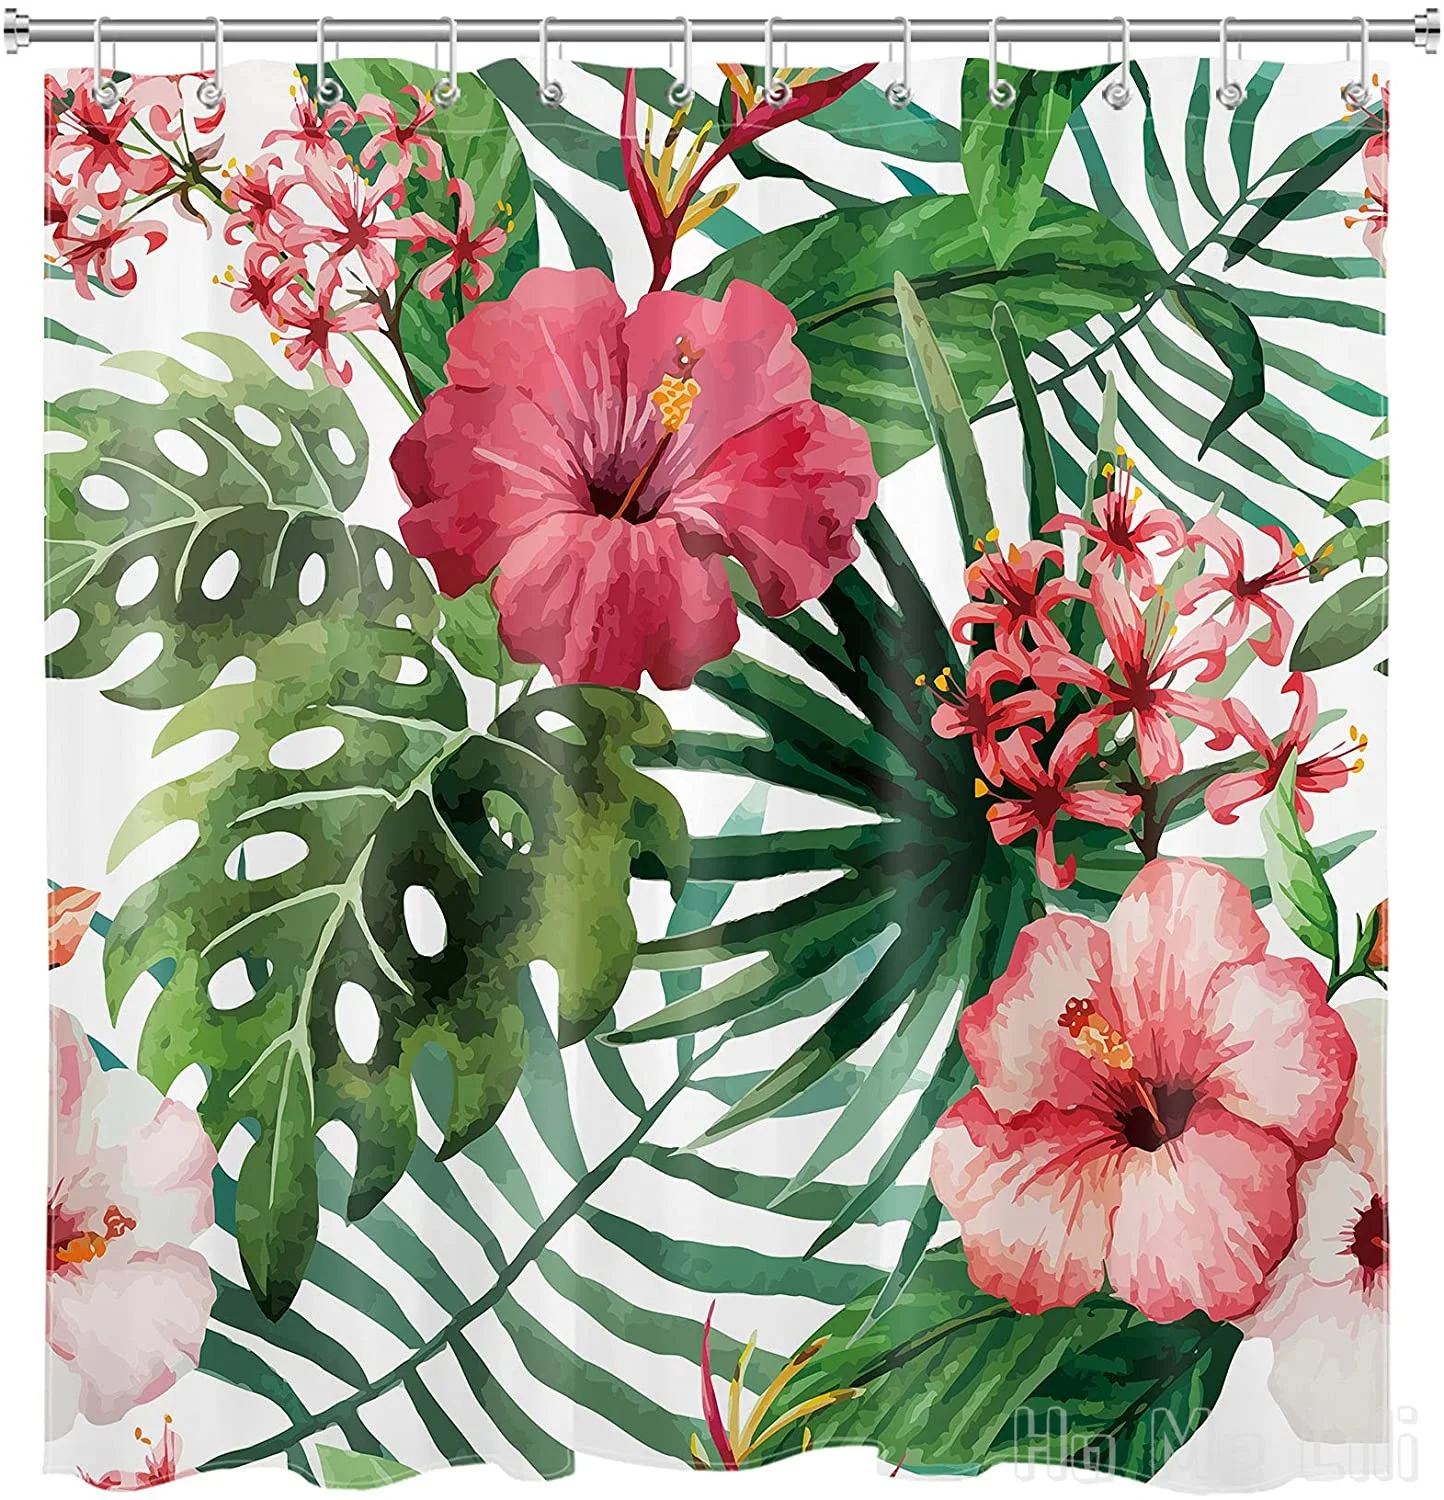 

Tropical Palm By Ho Me Lili Shower Curtain Green Leaves Hibiscus Floral Summer For Bathroom Hawaii Plant Flower Waterproof